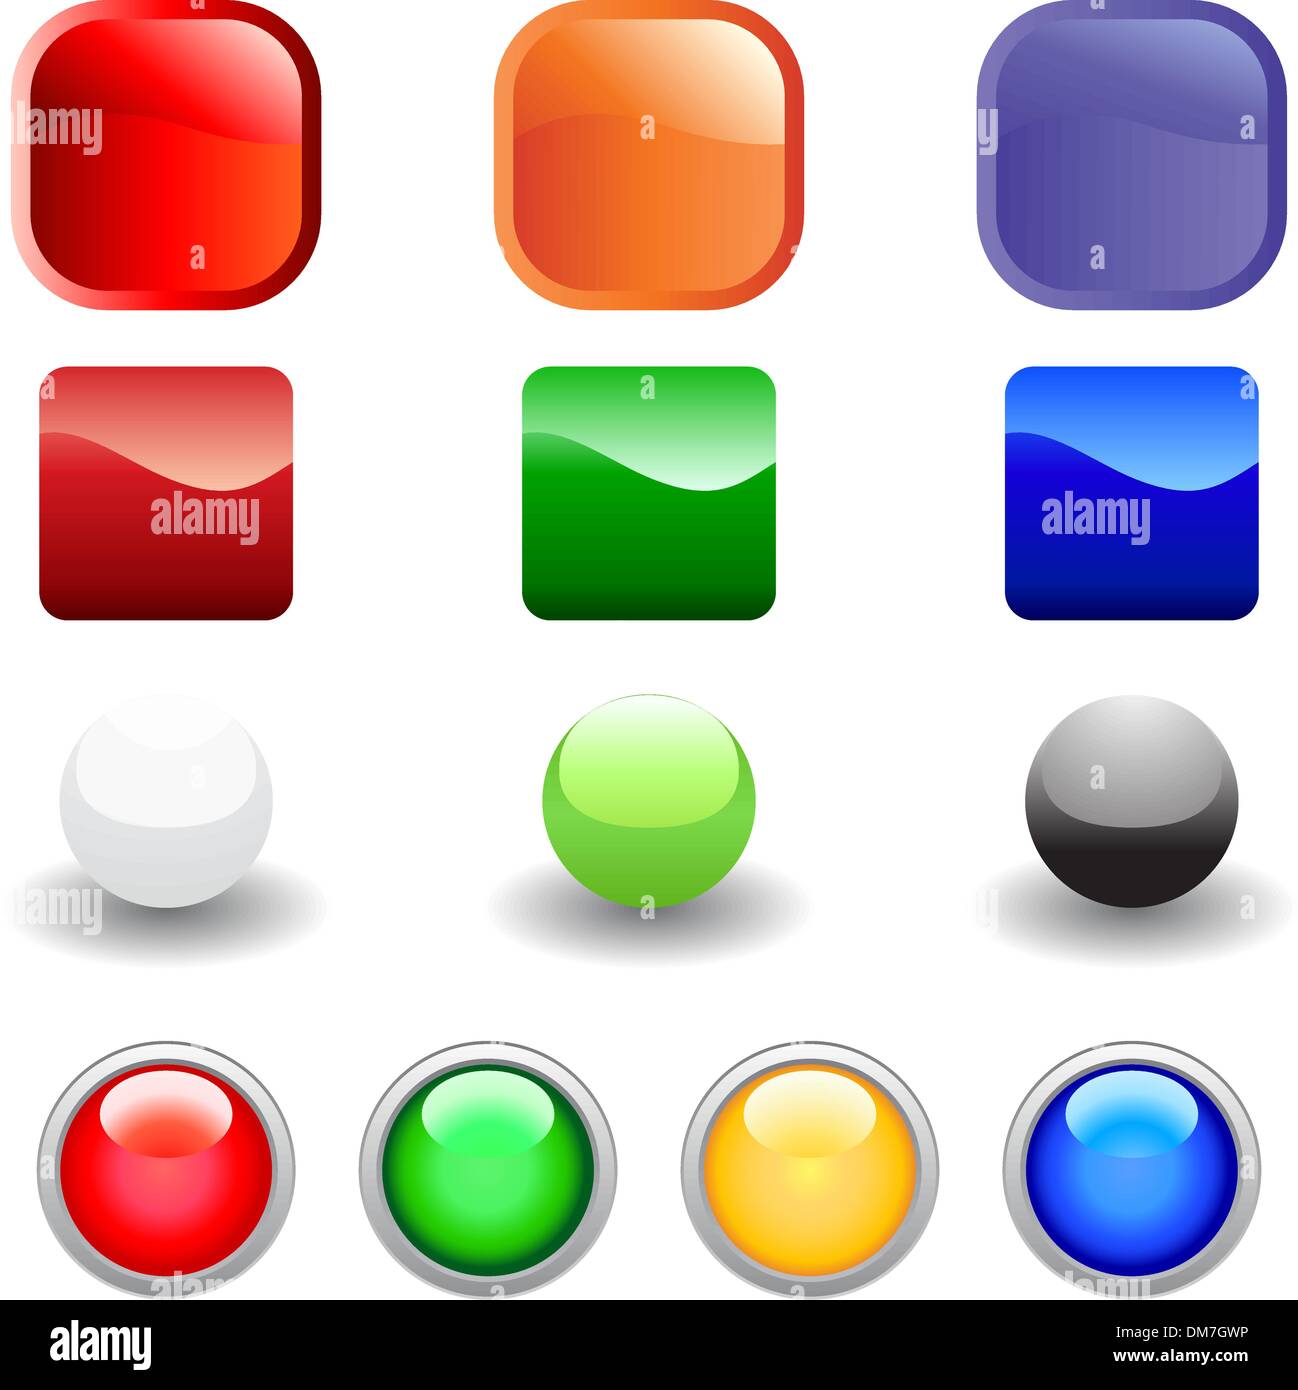 User interface colorful buttons set. Colorful glossy buttons set